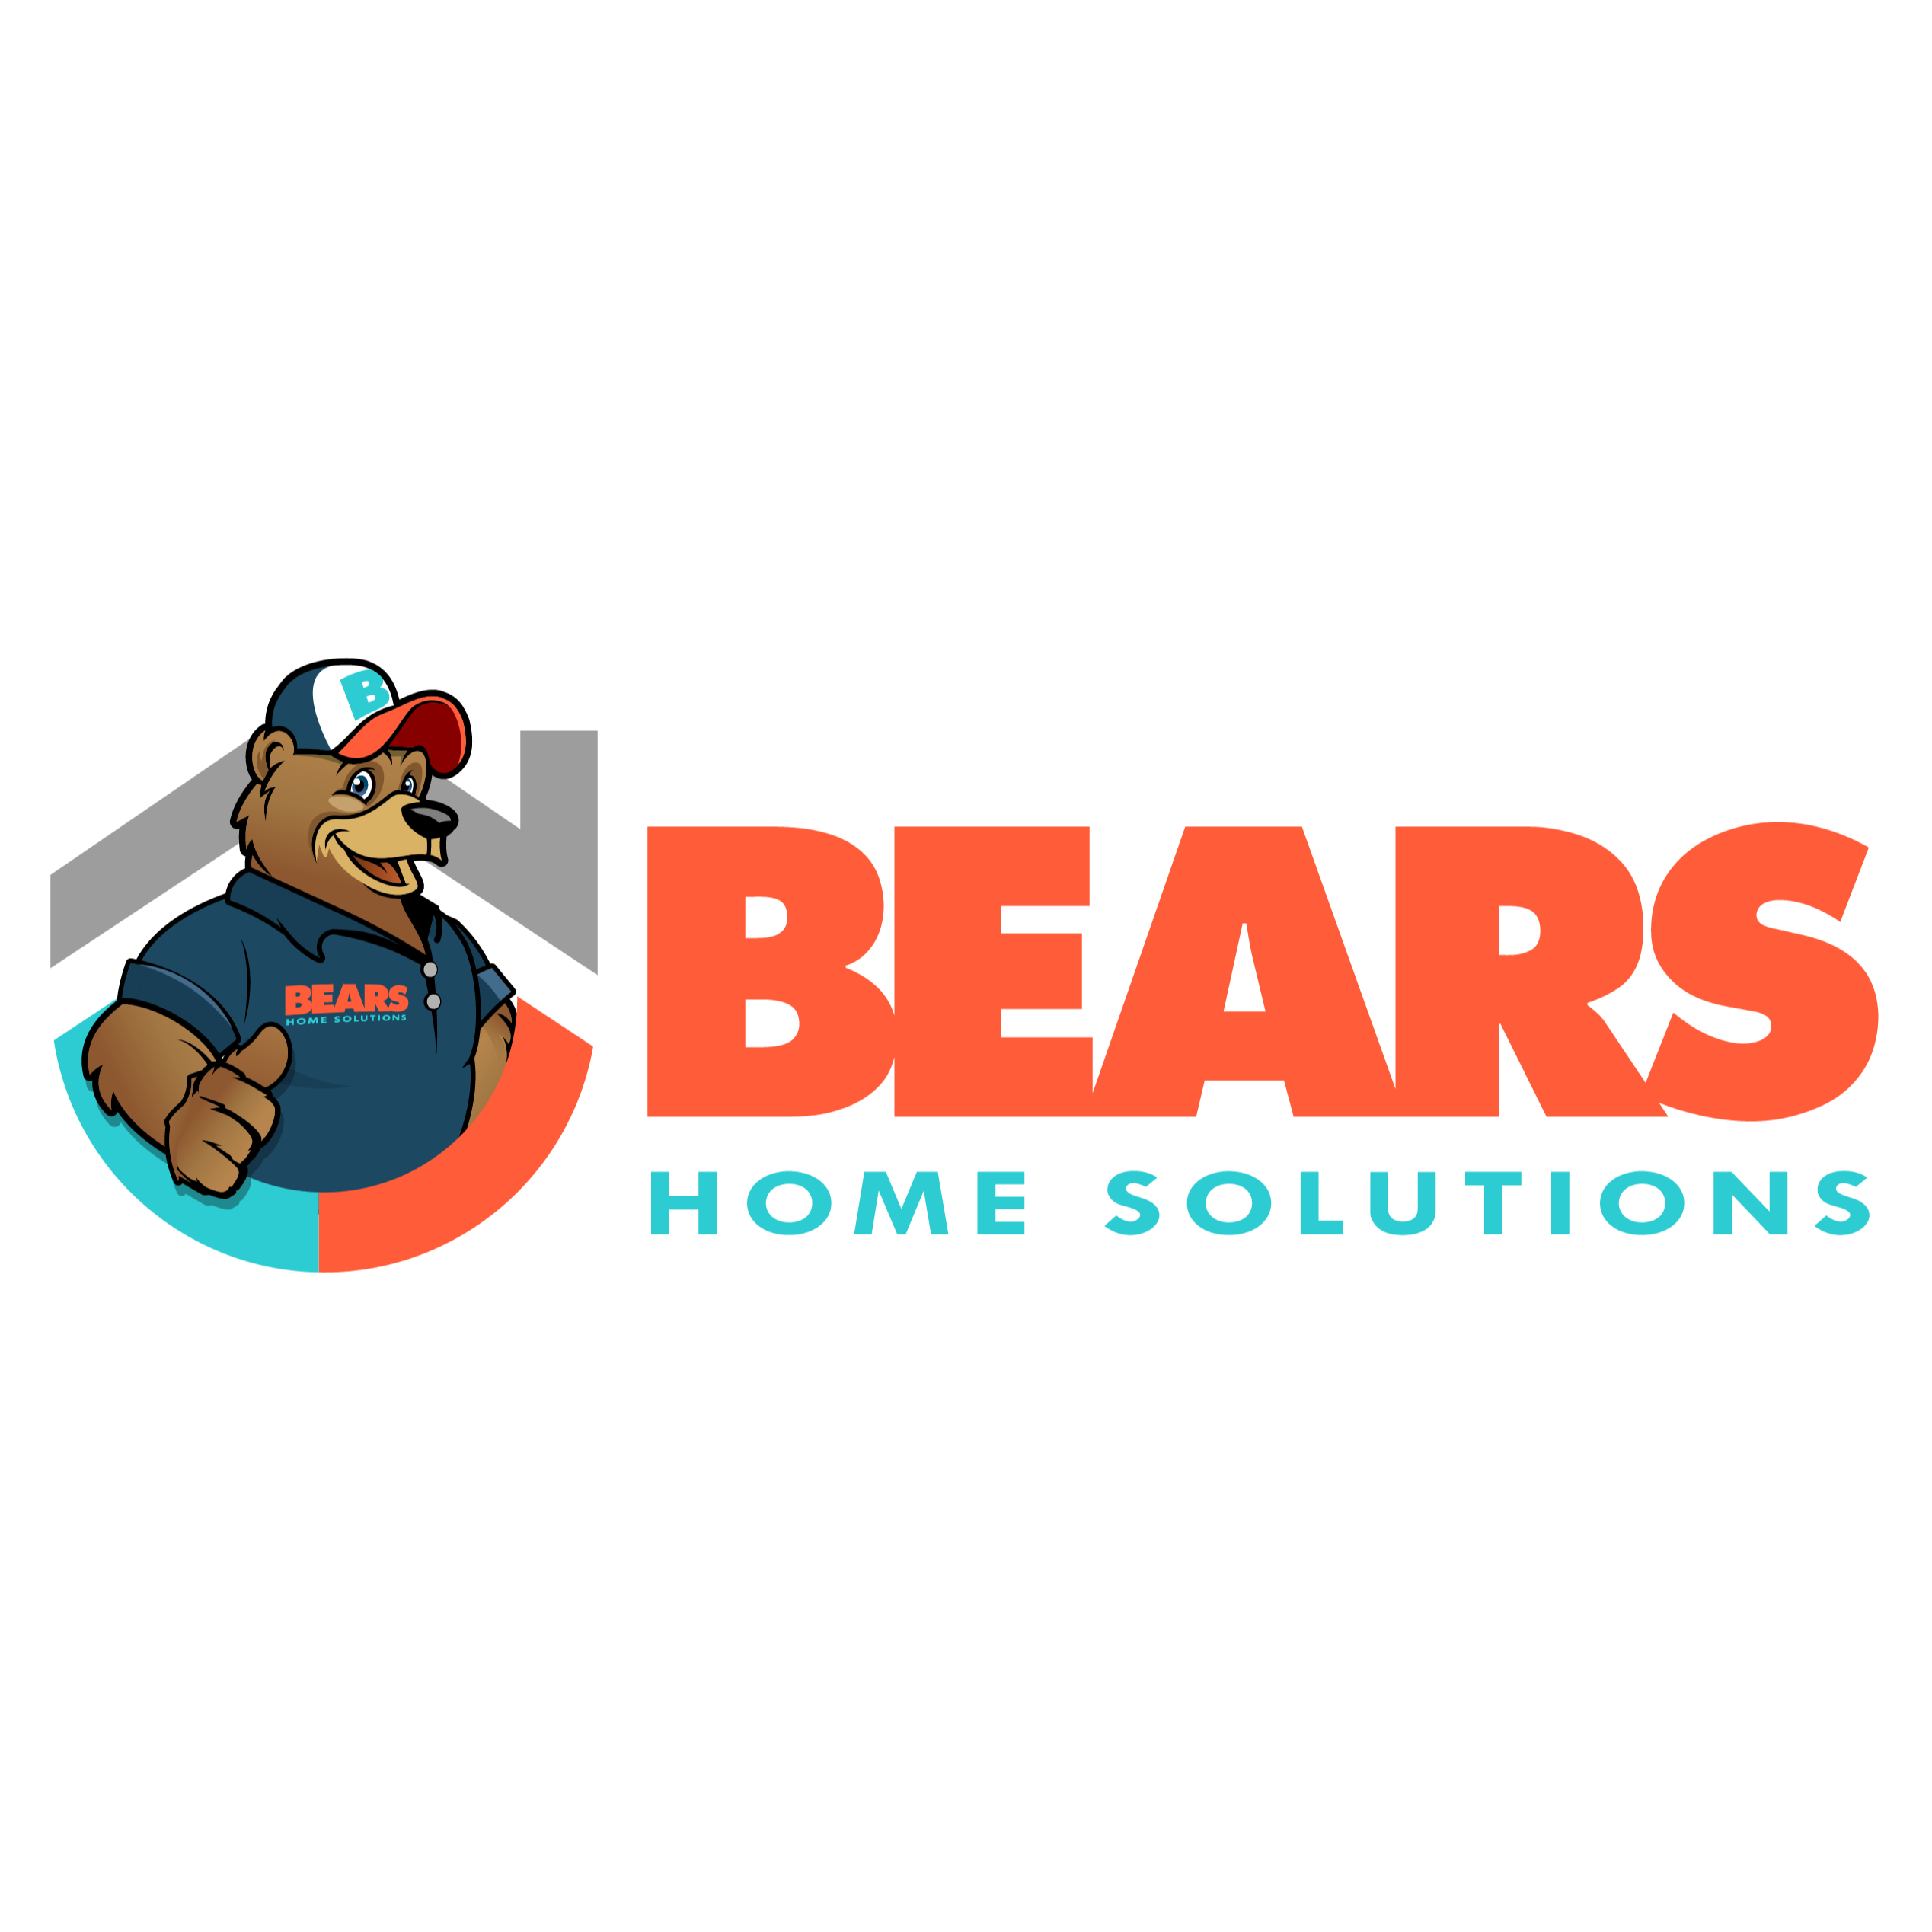 Bears Home Solutions